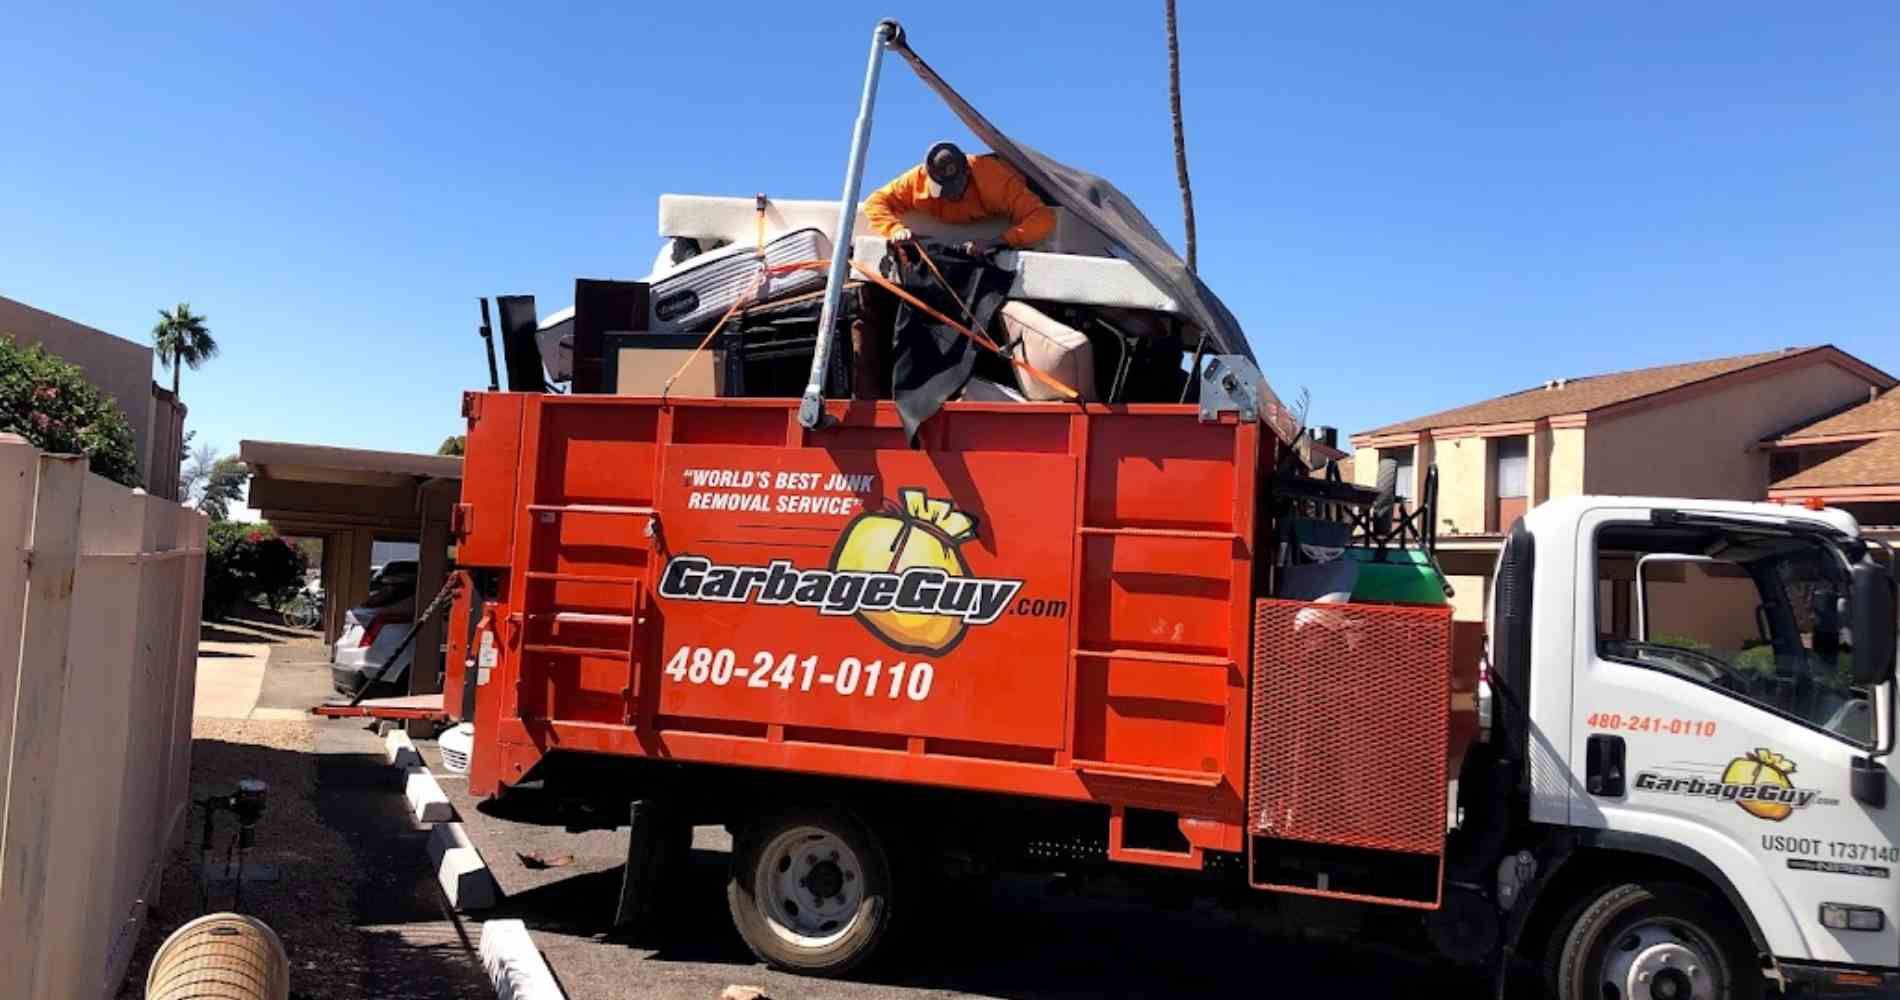 #1 for Furniture Removal in San Tan Valley, AZ With Over 1200 5-Star Reviews!